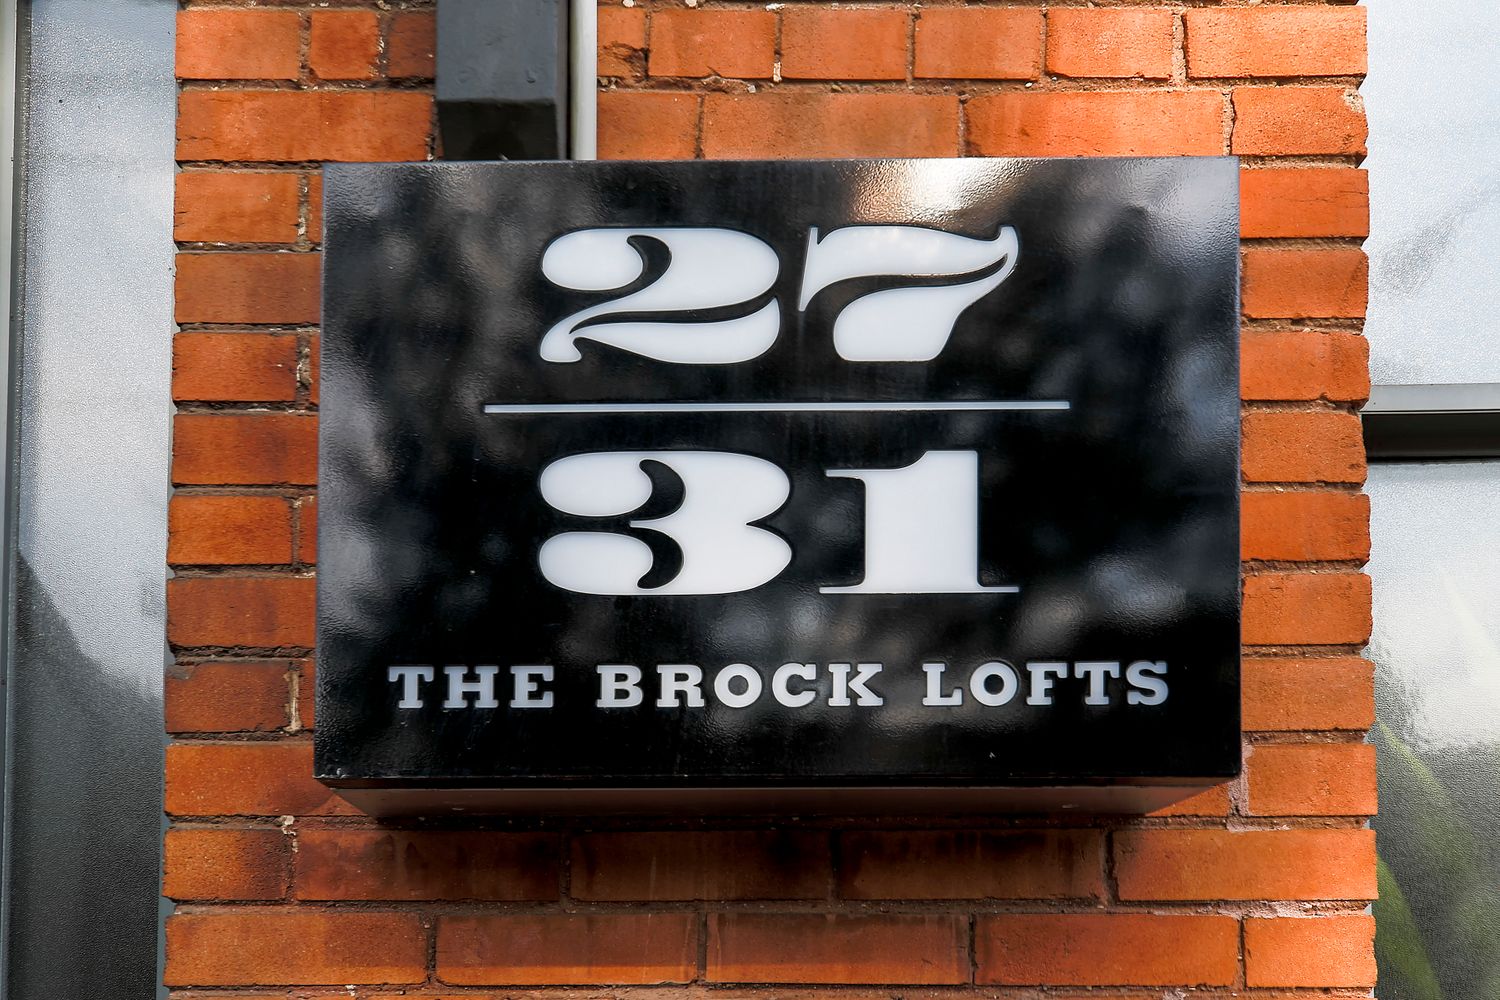 31 Brock Avenue. The Brock Lofts is located in  West End, Toronto - image #4 of 4